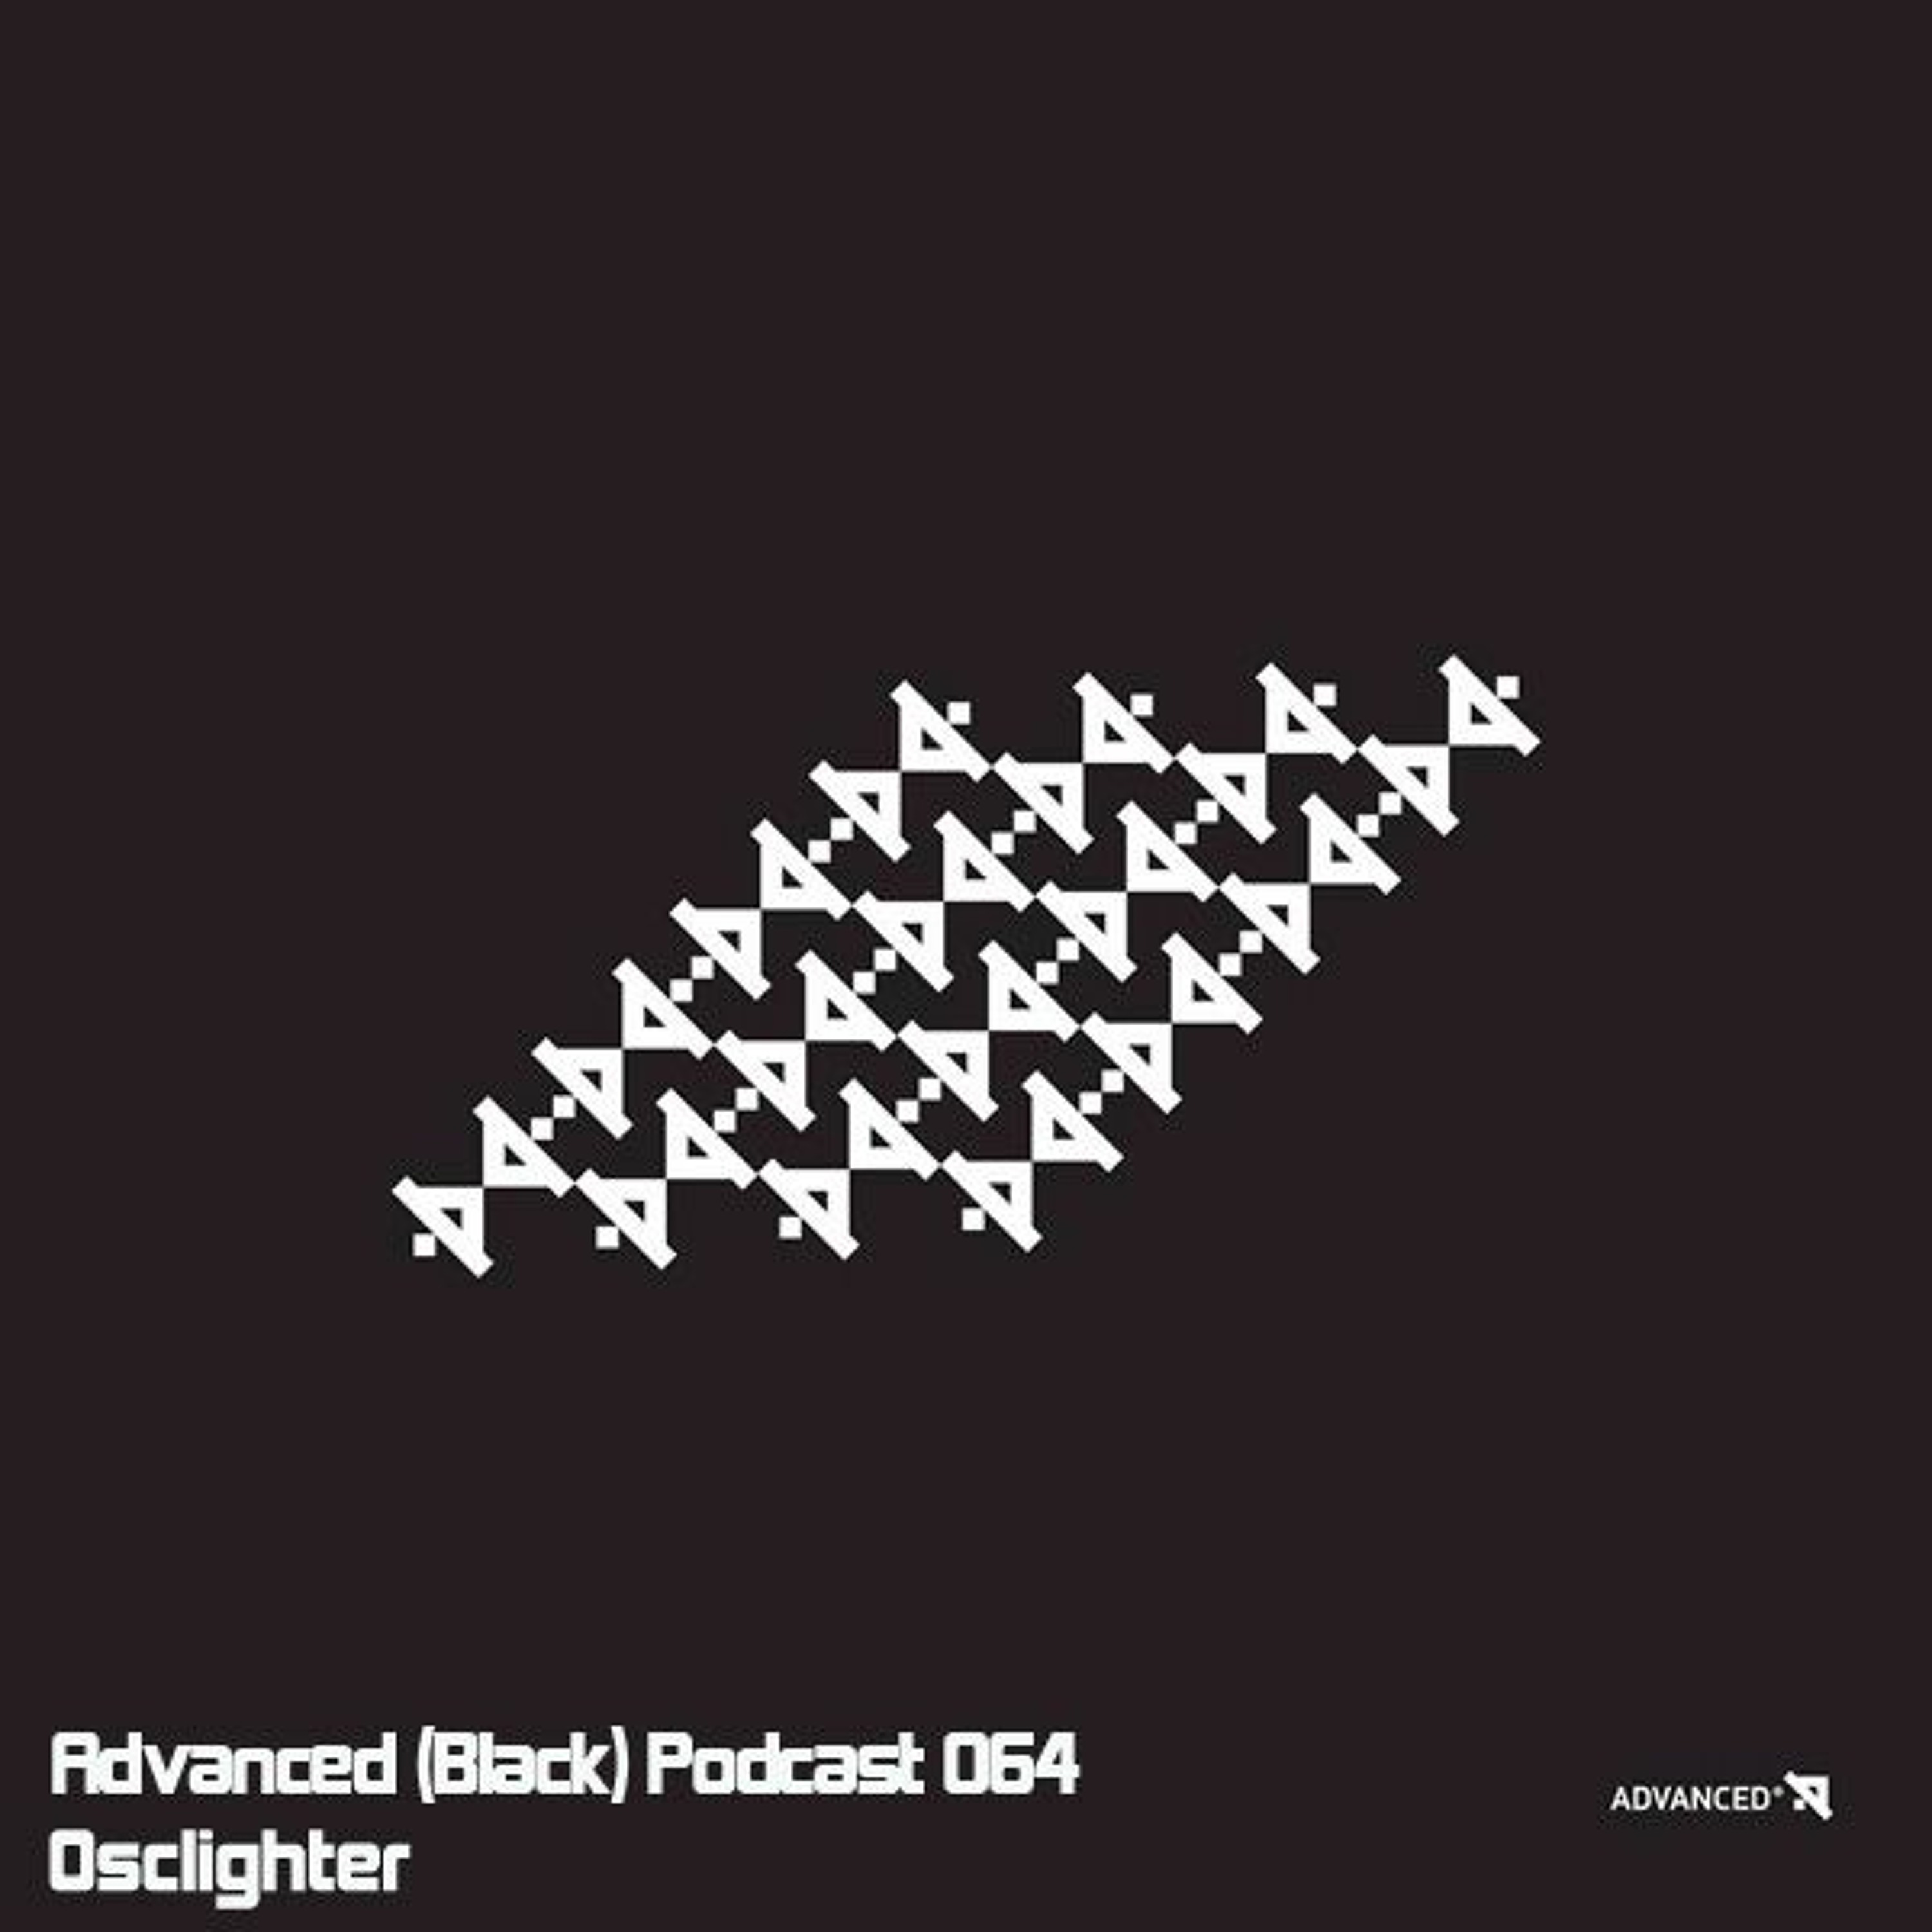 Advanced (Black) Podcast 064 with Osclighter